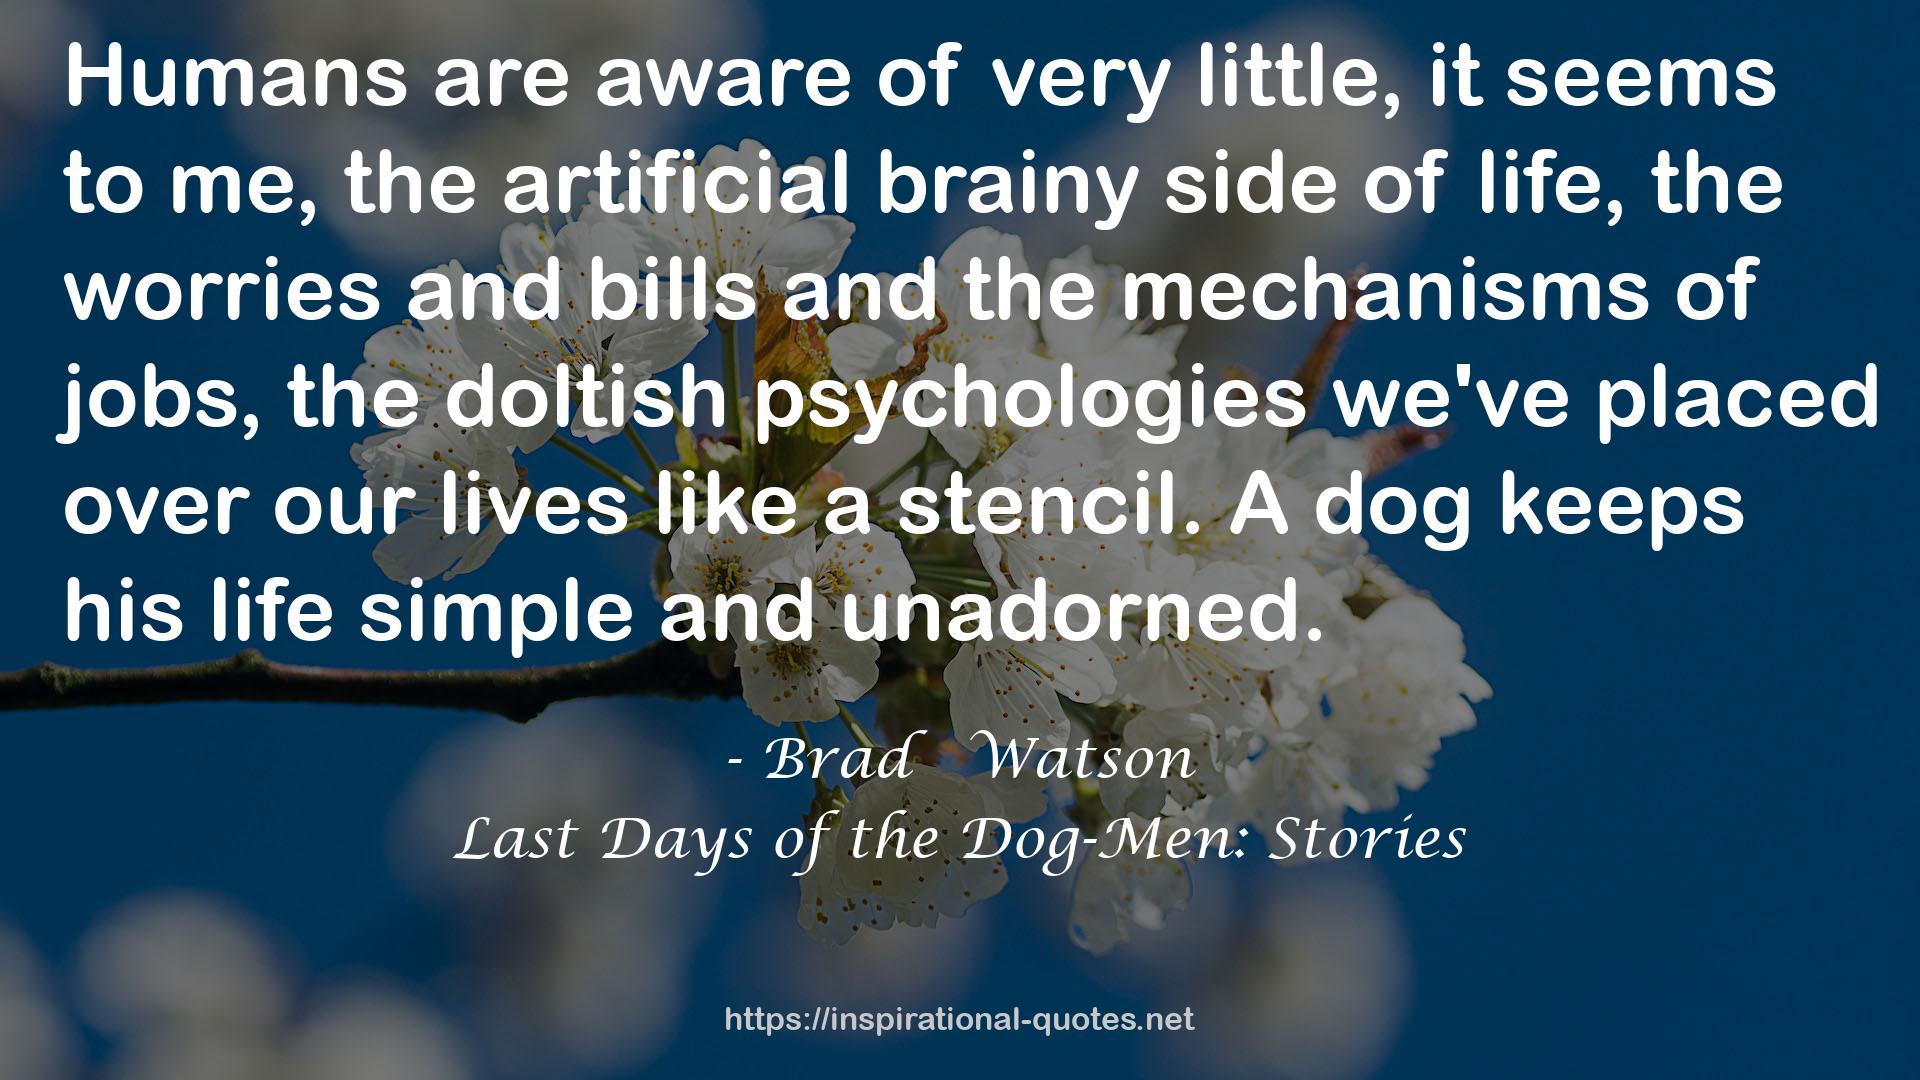 Last Days of the Dog-Men: Stories QUOTES